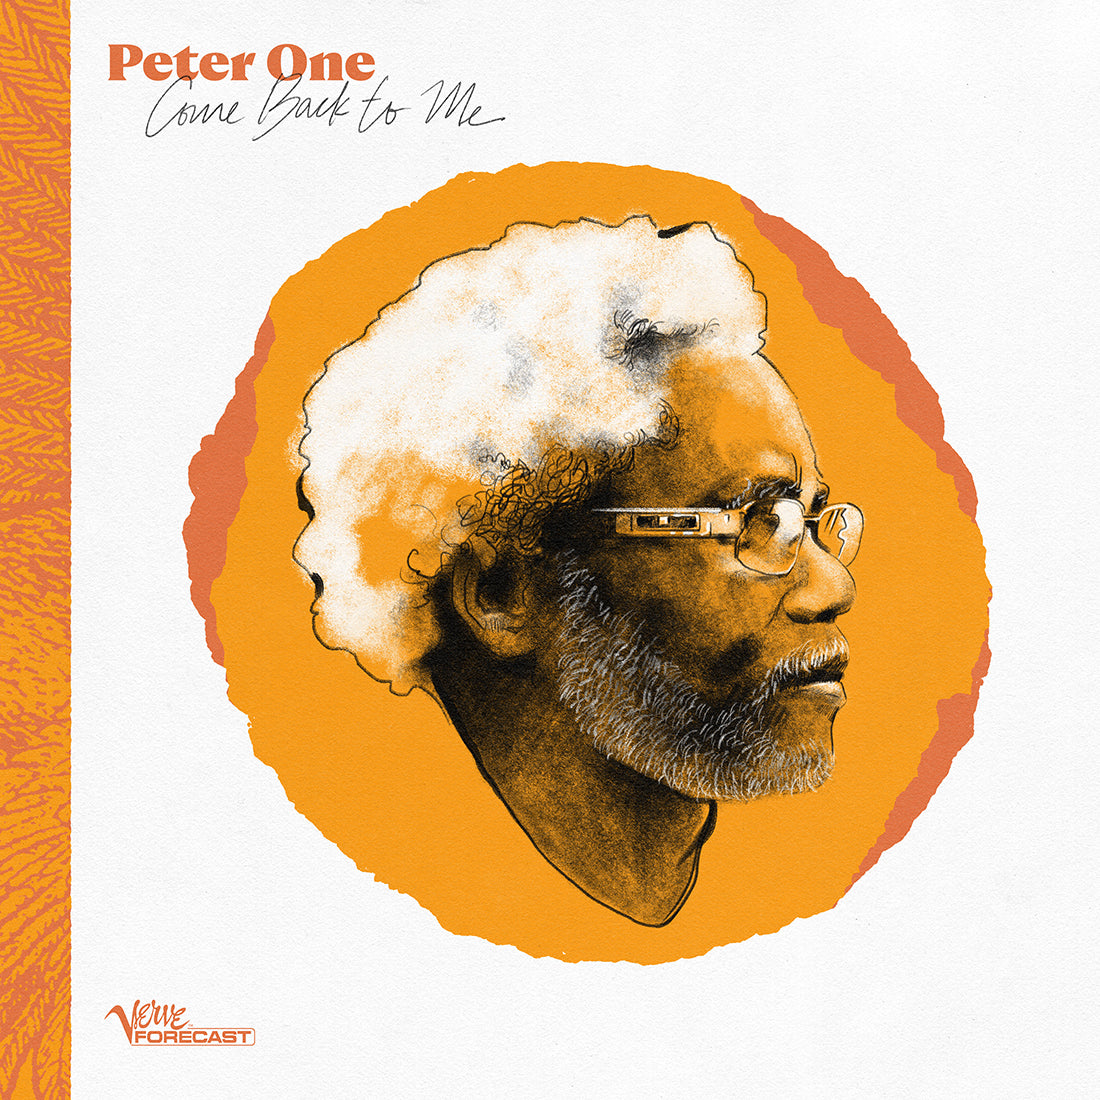 Peter One - Come Back To Me: CD